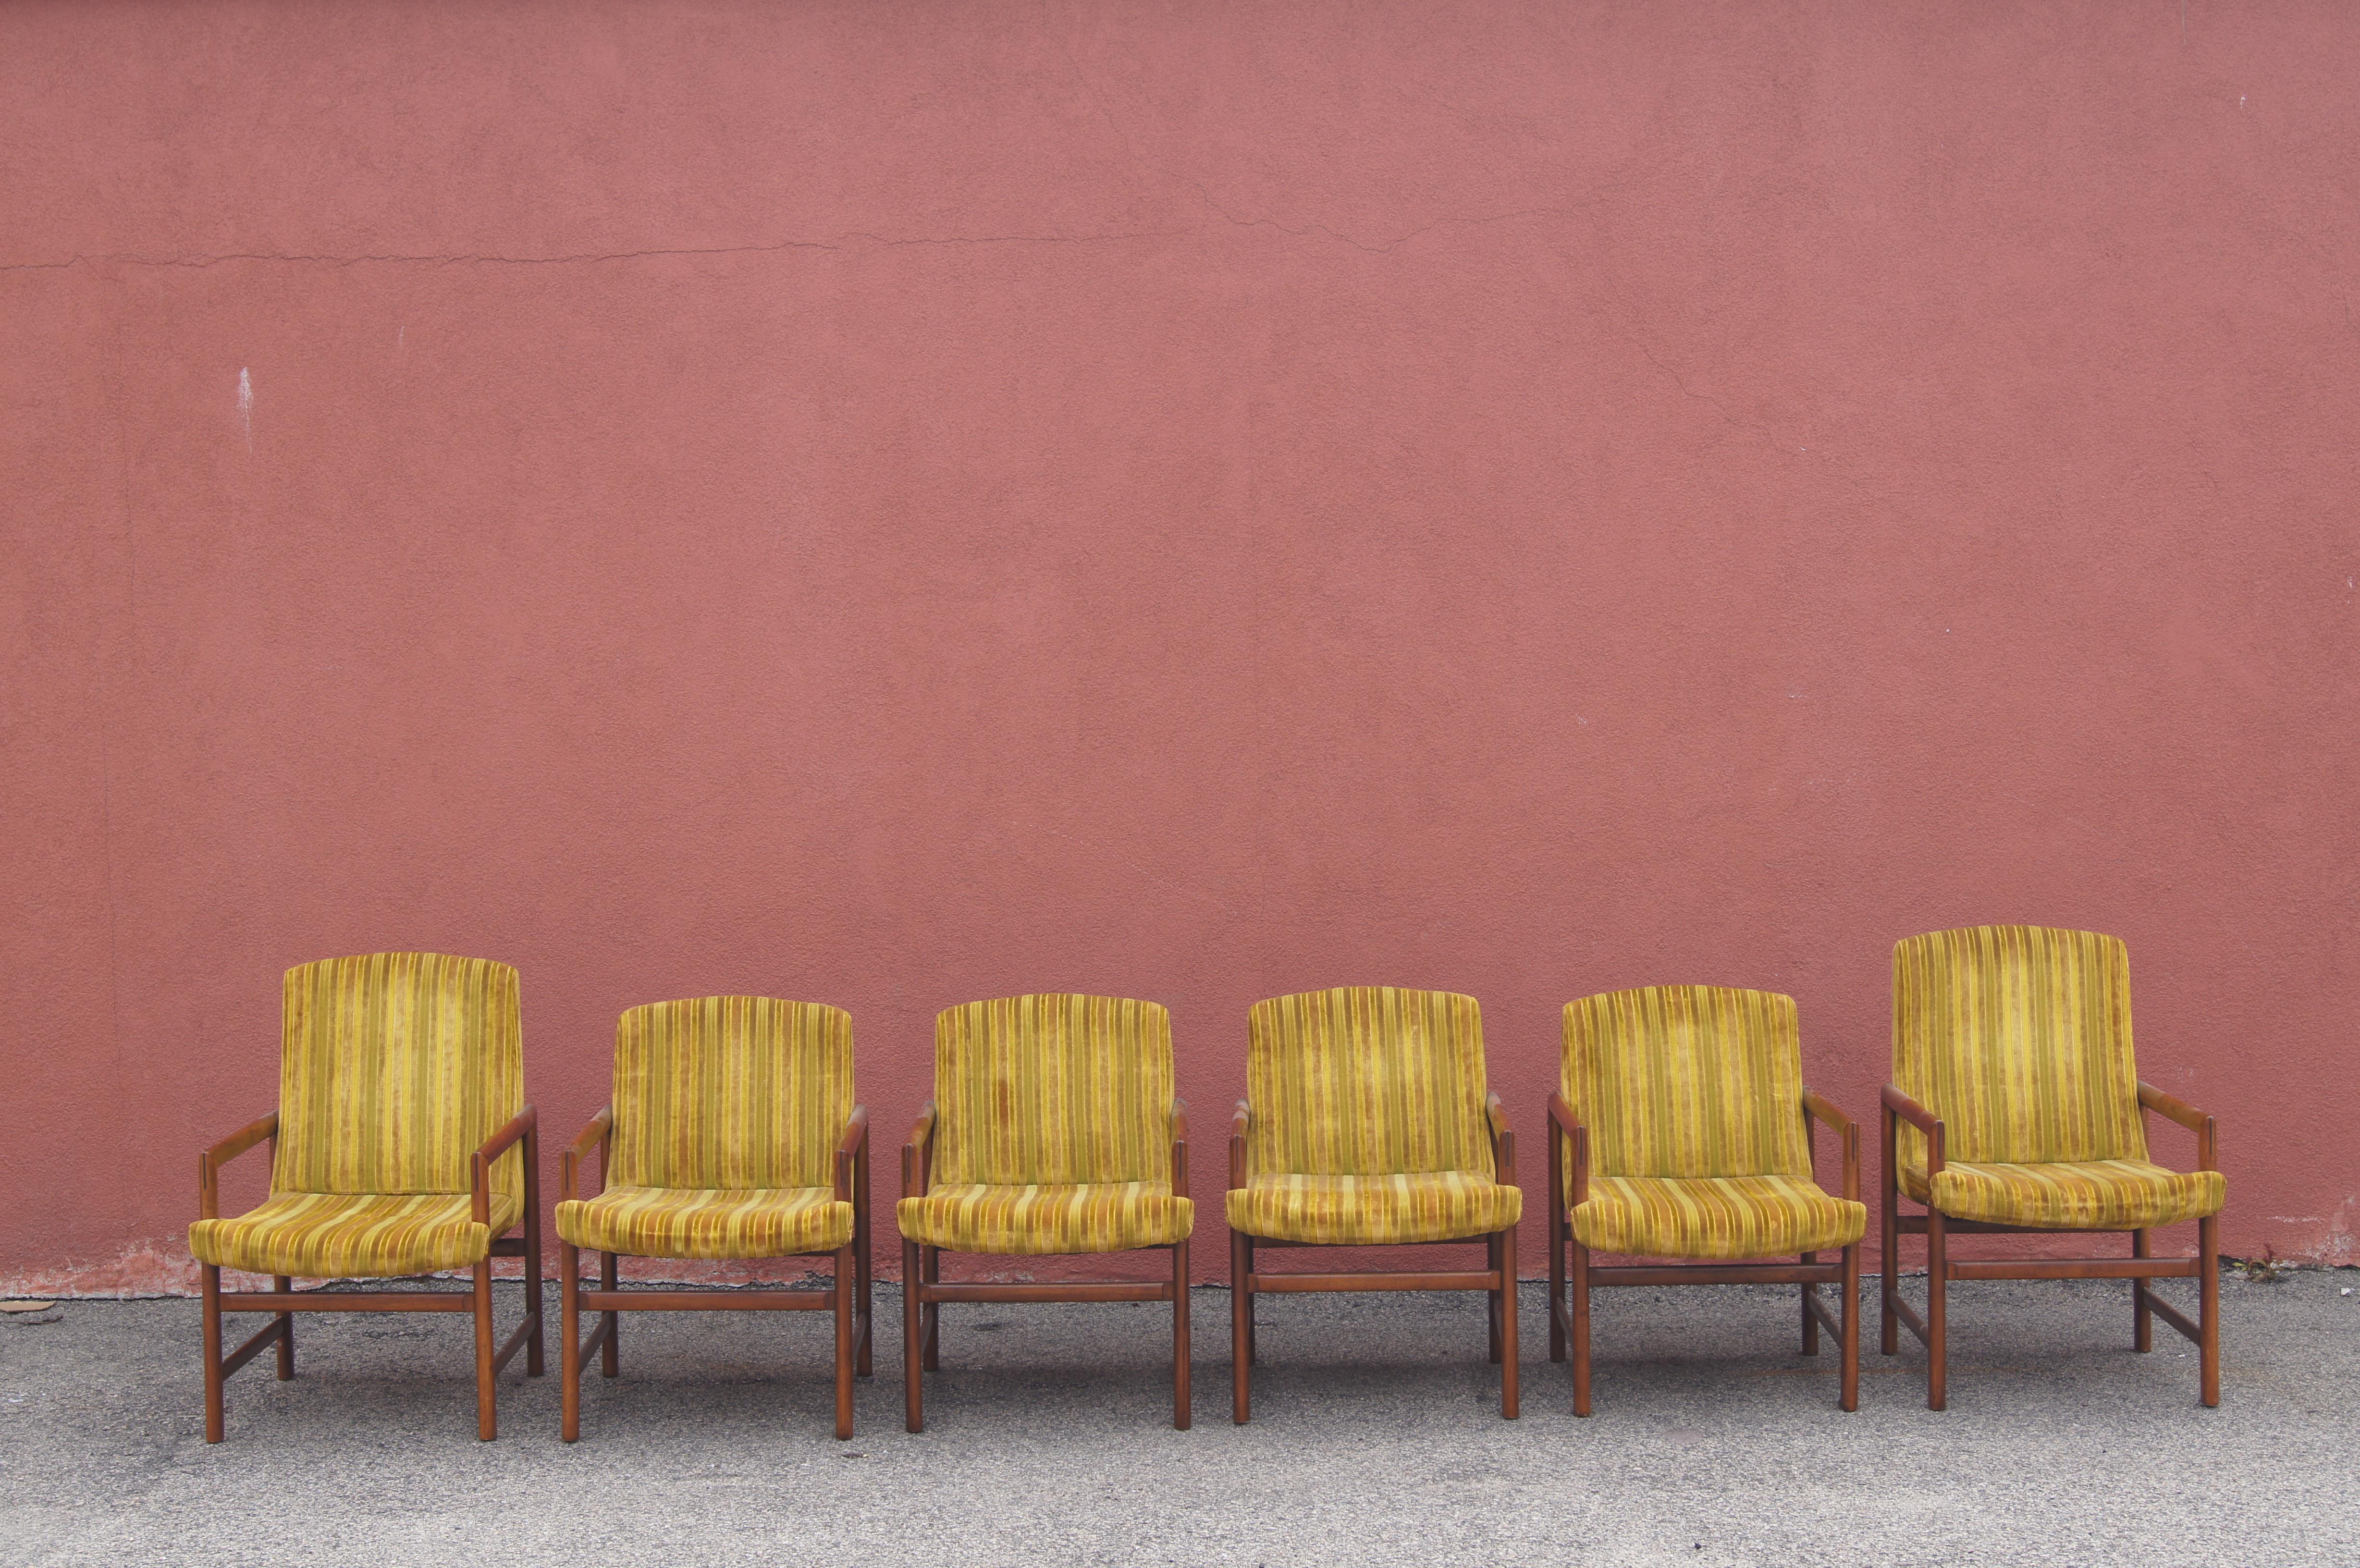 Sold in the late 1950s by Rapids Furniture of Boston, this set of mid-century dining chairs comprises six upholstered armchairs whose solid walnut frames feature handsome joinery details. 

The dimensions below reflect the correct dimensions for